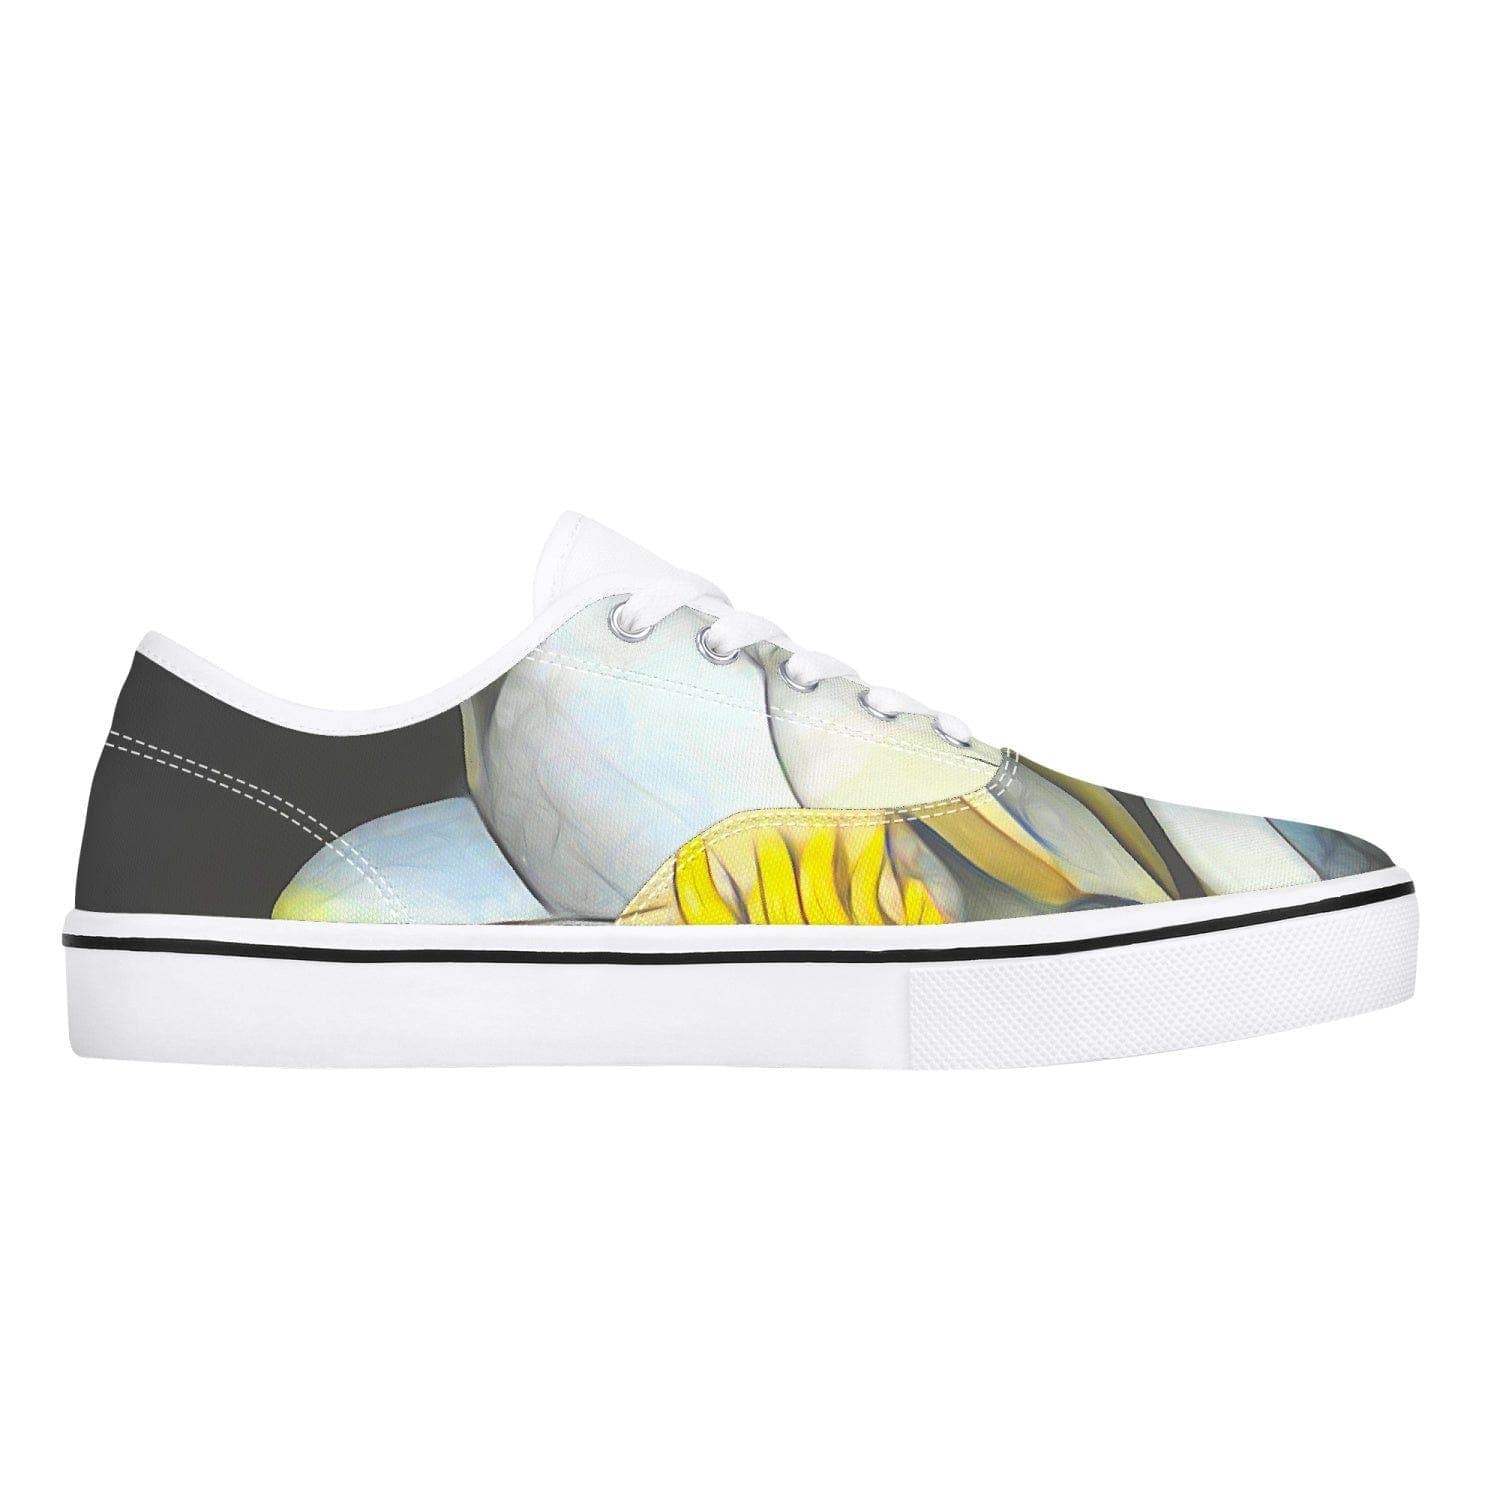 Water lilly. Skate Shoes - White/Black, designed shoes by Sensus Studio